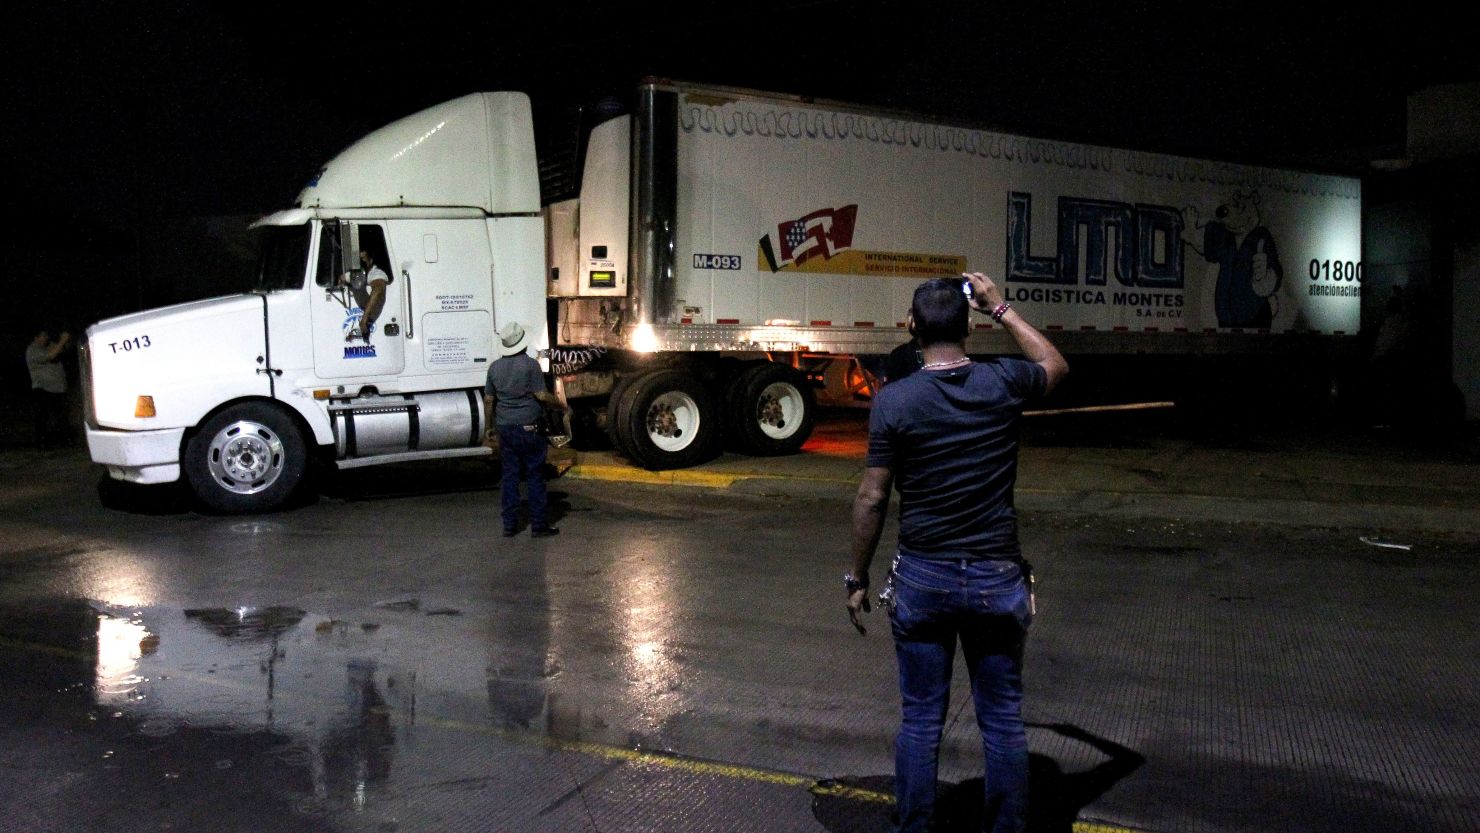 A truck carrying the corpses drives through Guadalajara.